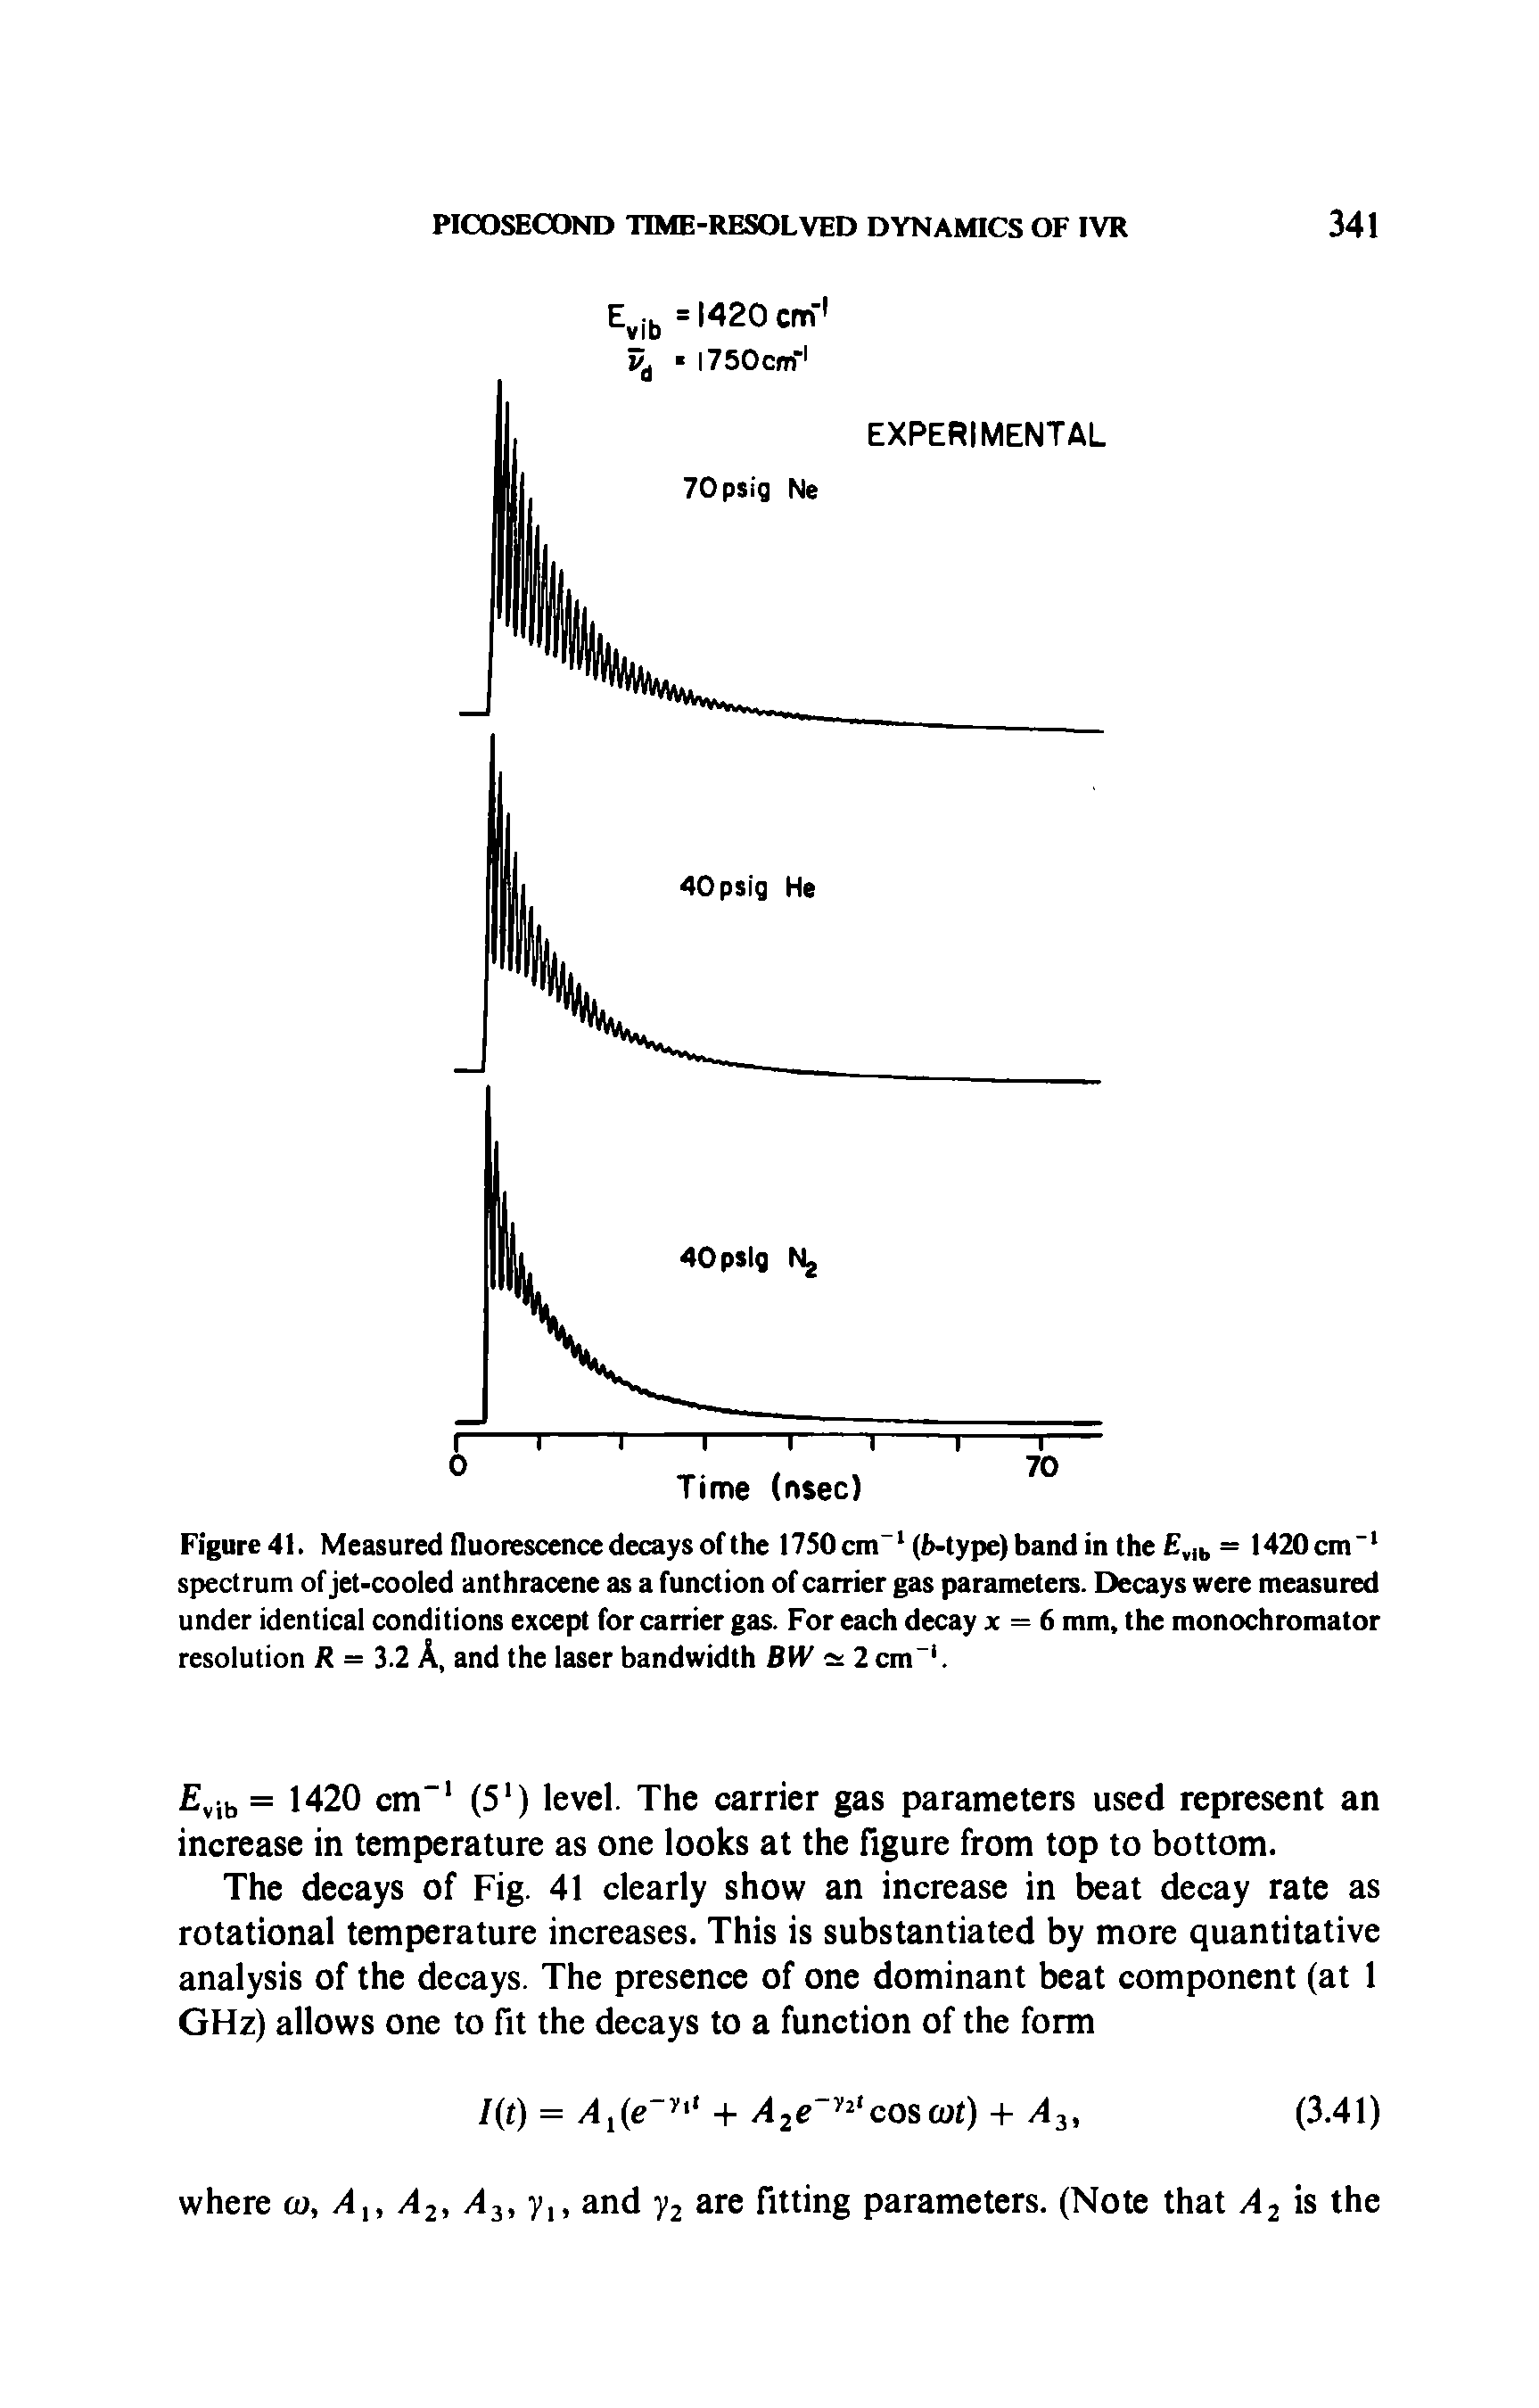 Figure 41. Measured fluorescence decays of the 1750 cm-1 (h-type) band in the v,b = 1420cm"1 spectrum of jet-cooled anthracene as a function of carrier gas parameters. Decays were measured under identical conditions except for carrier gas. For each decay x = 6 mm, the monochromator resolution R = 3.2 A, and the laser bandwidth BW cs 2 cm"1.